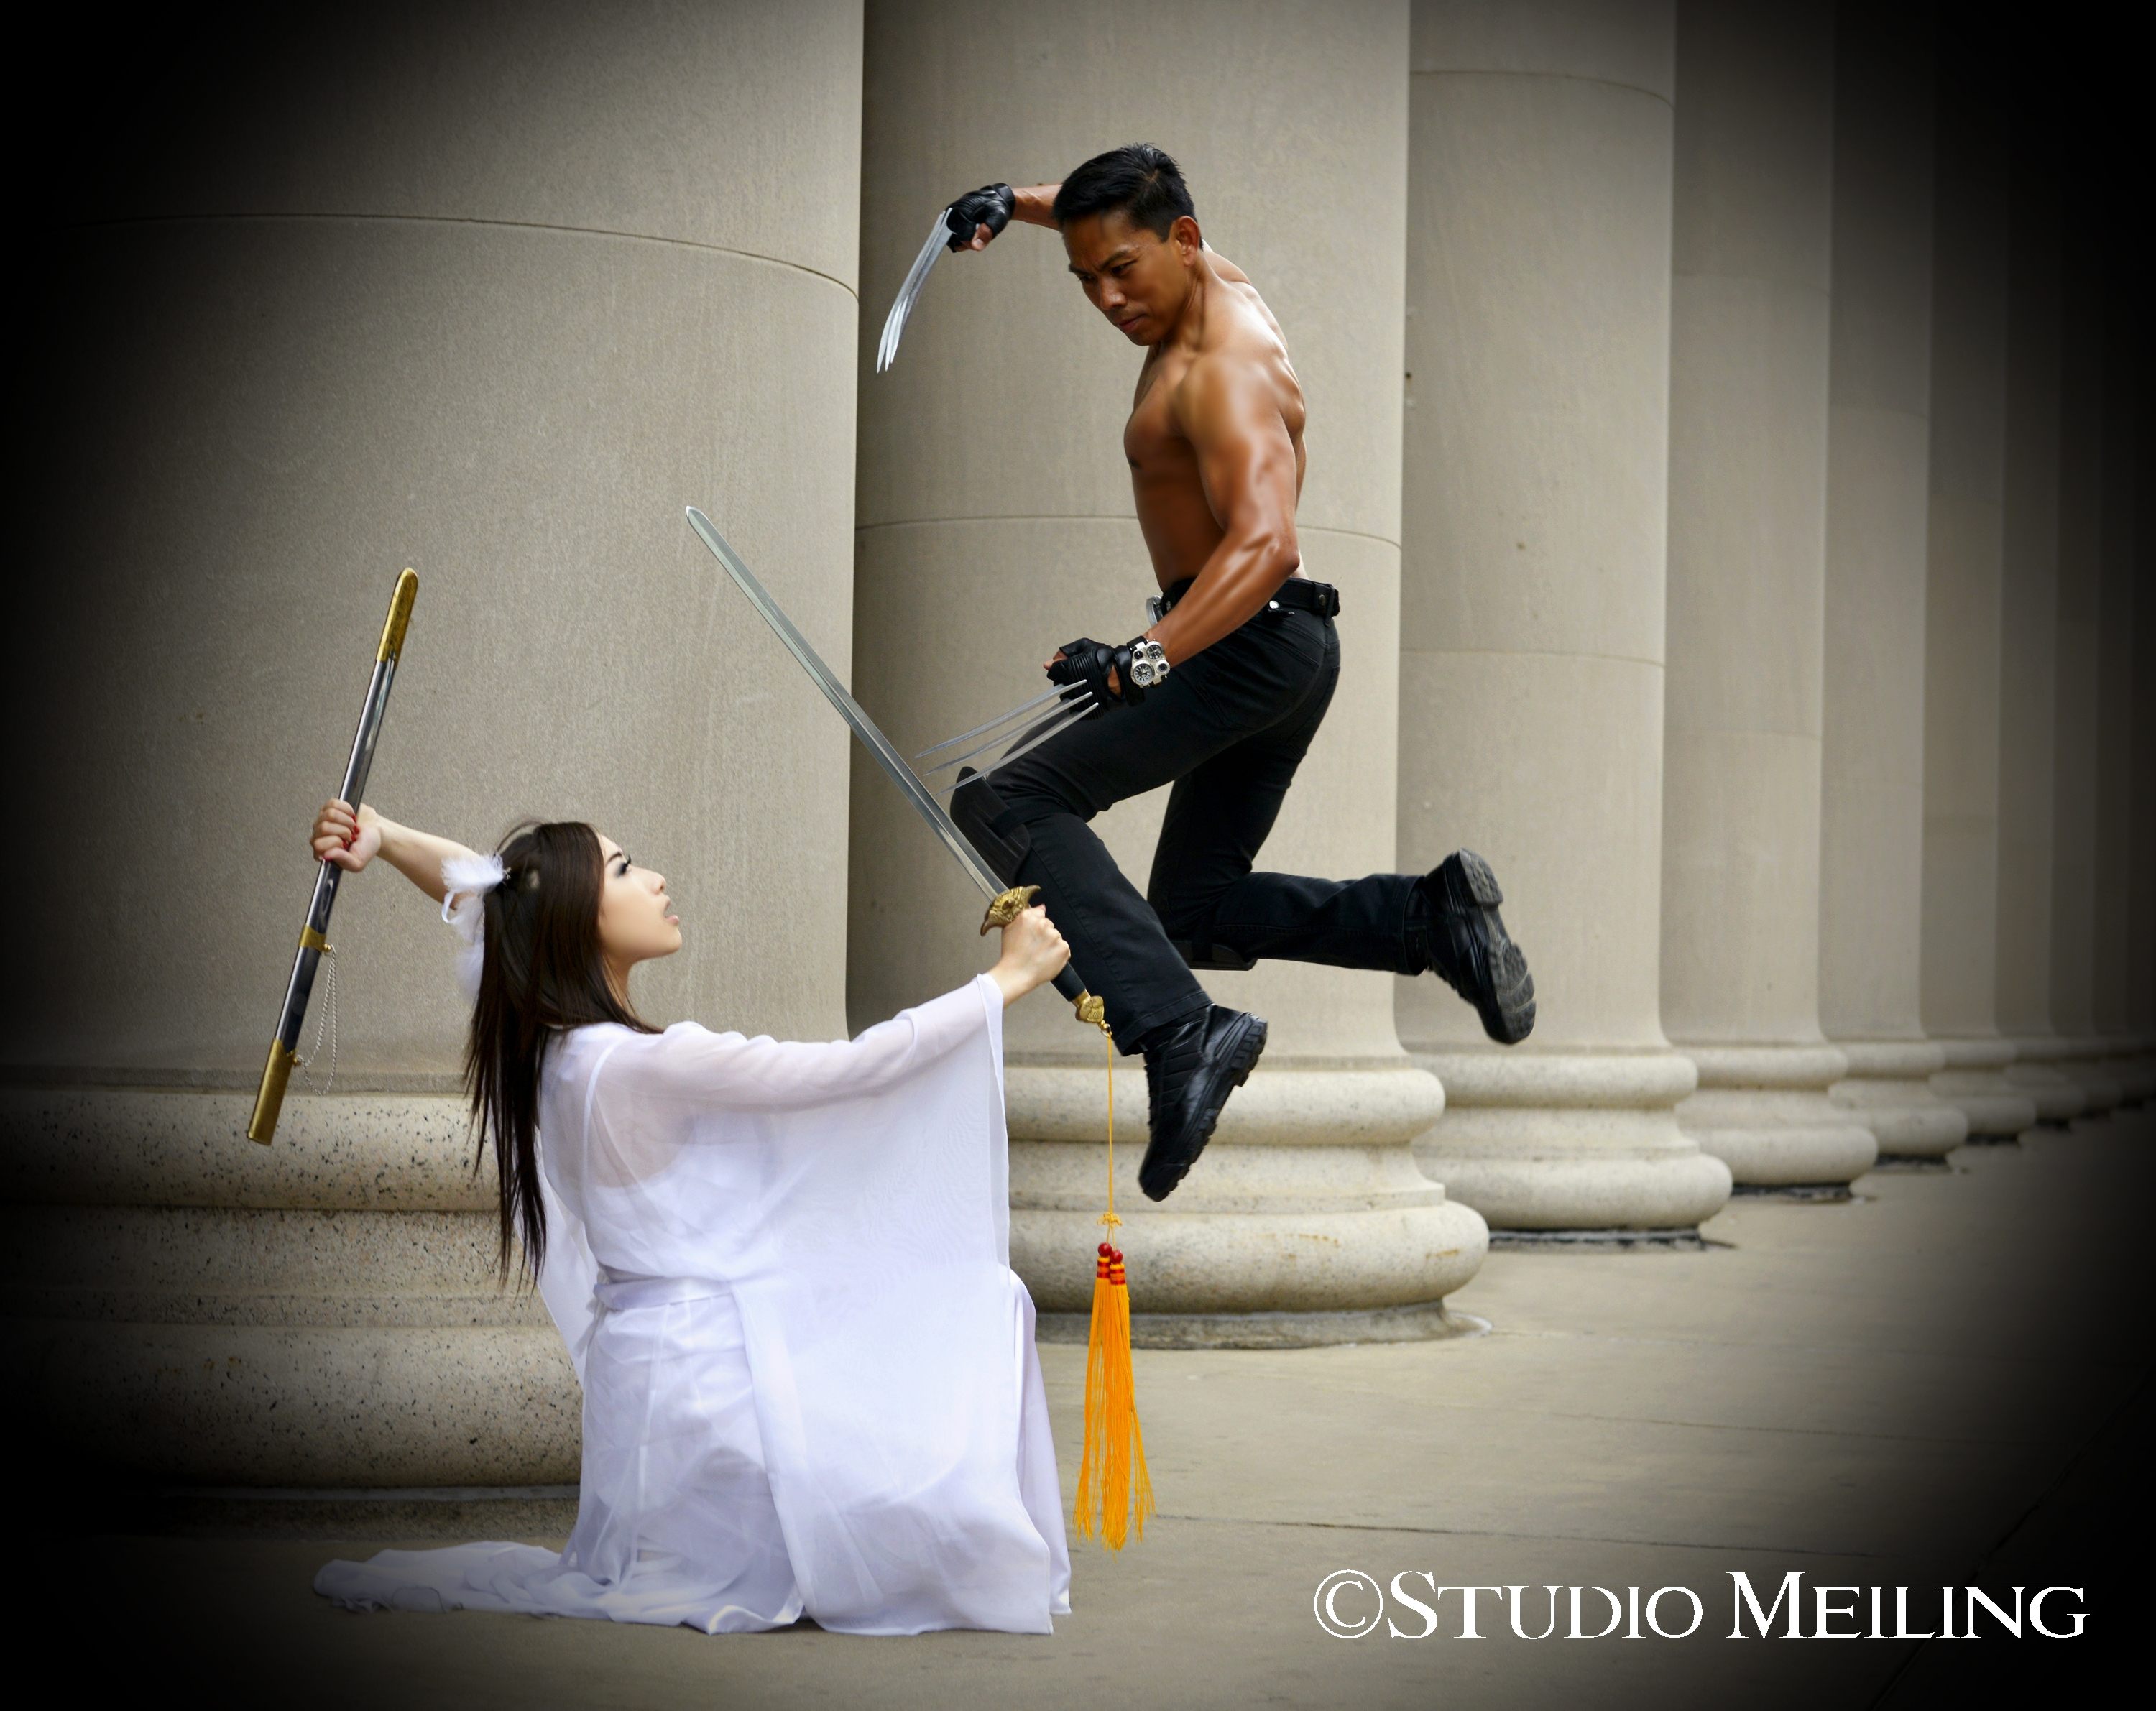 NASA Scientist Jojo Sayson with Meiling Jin shooting action hero photos in Chicago.